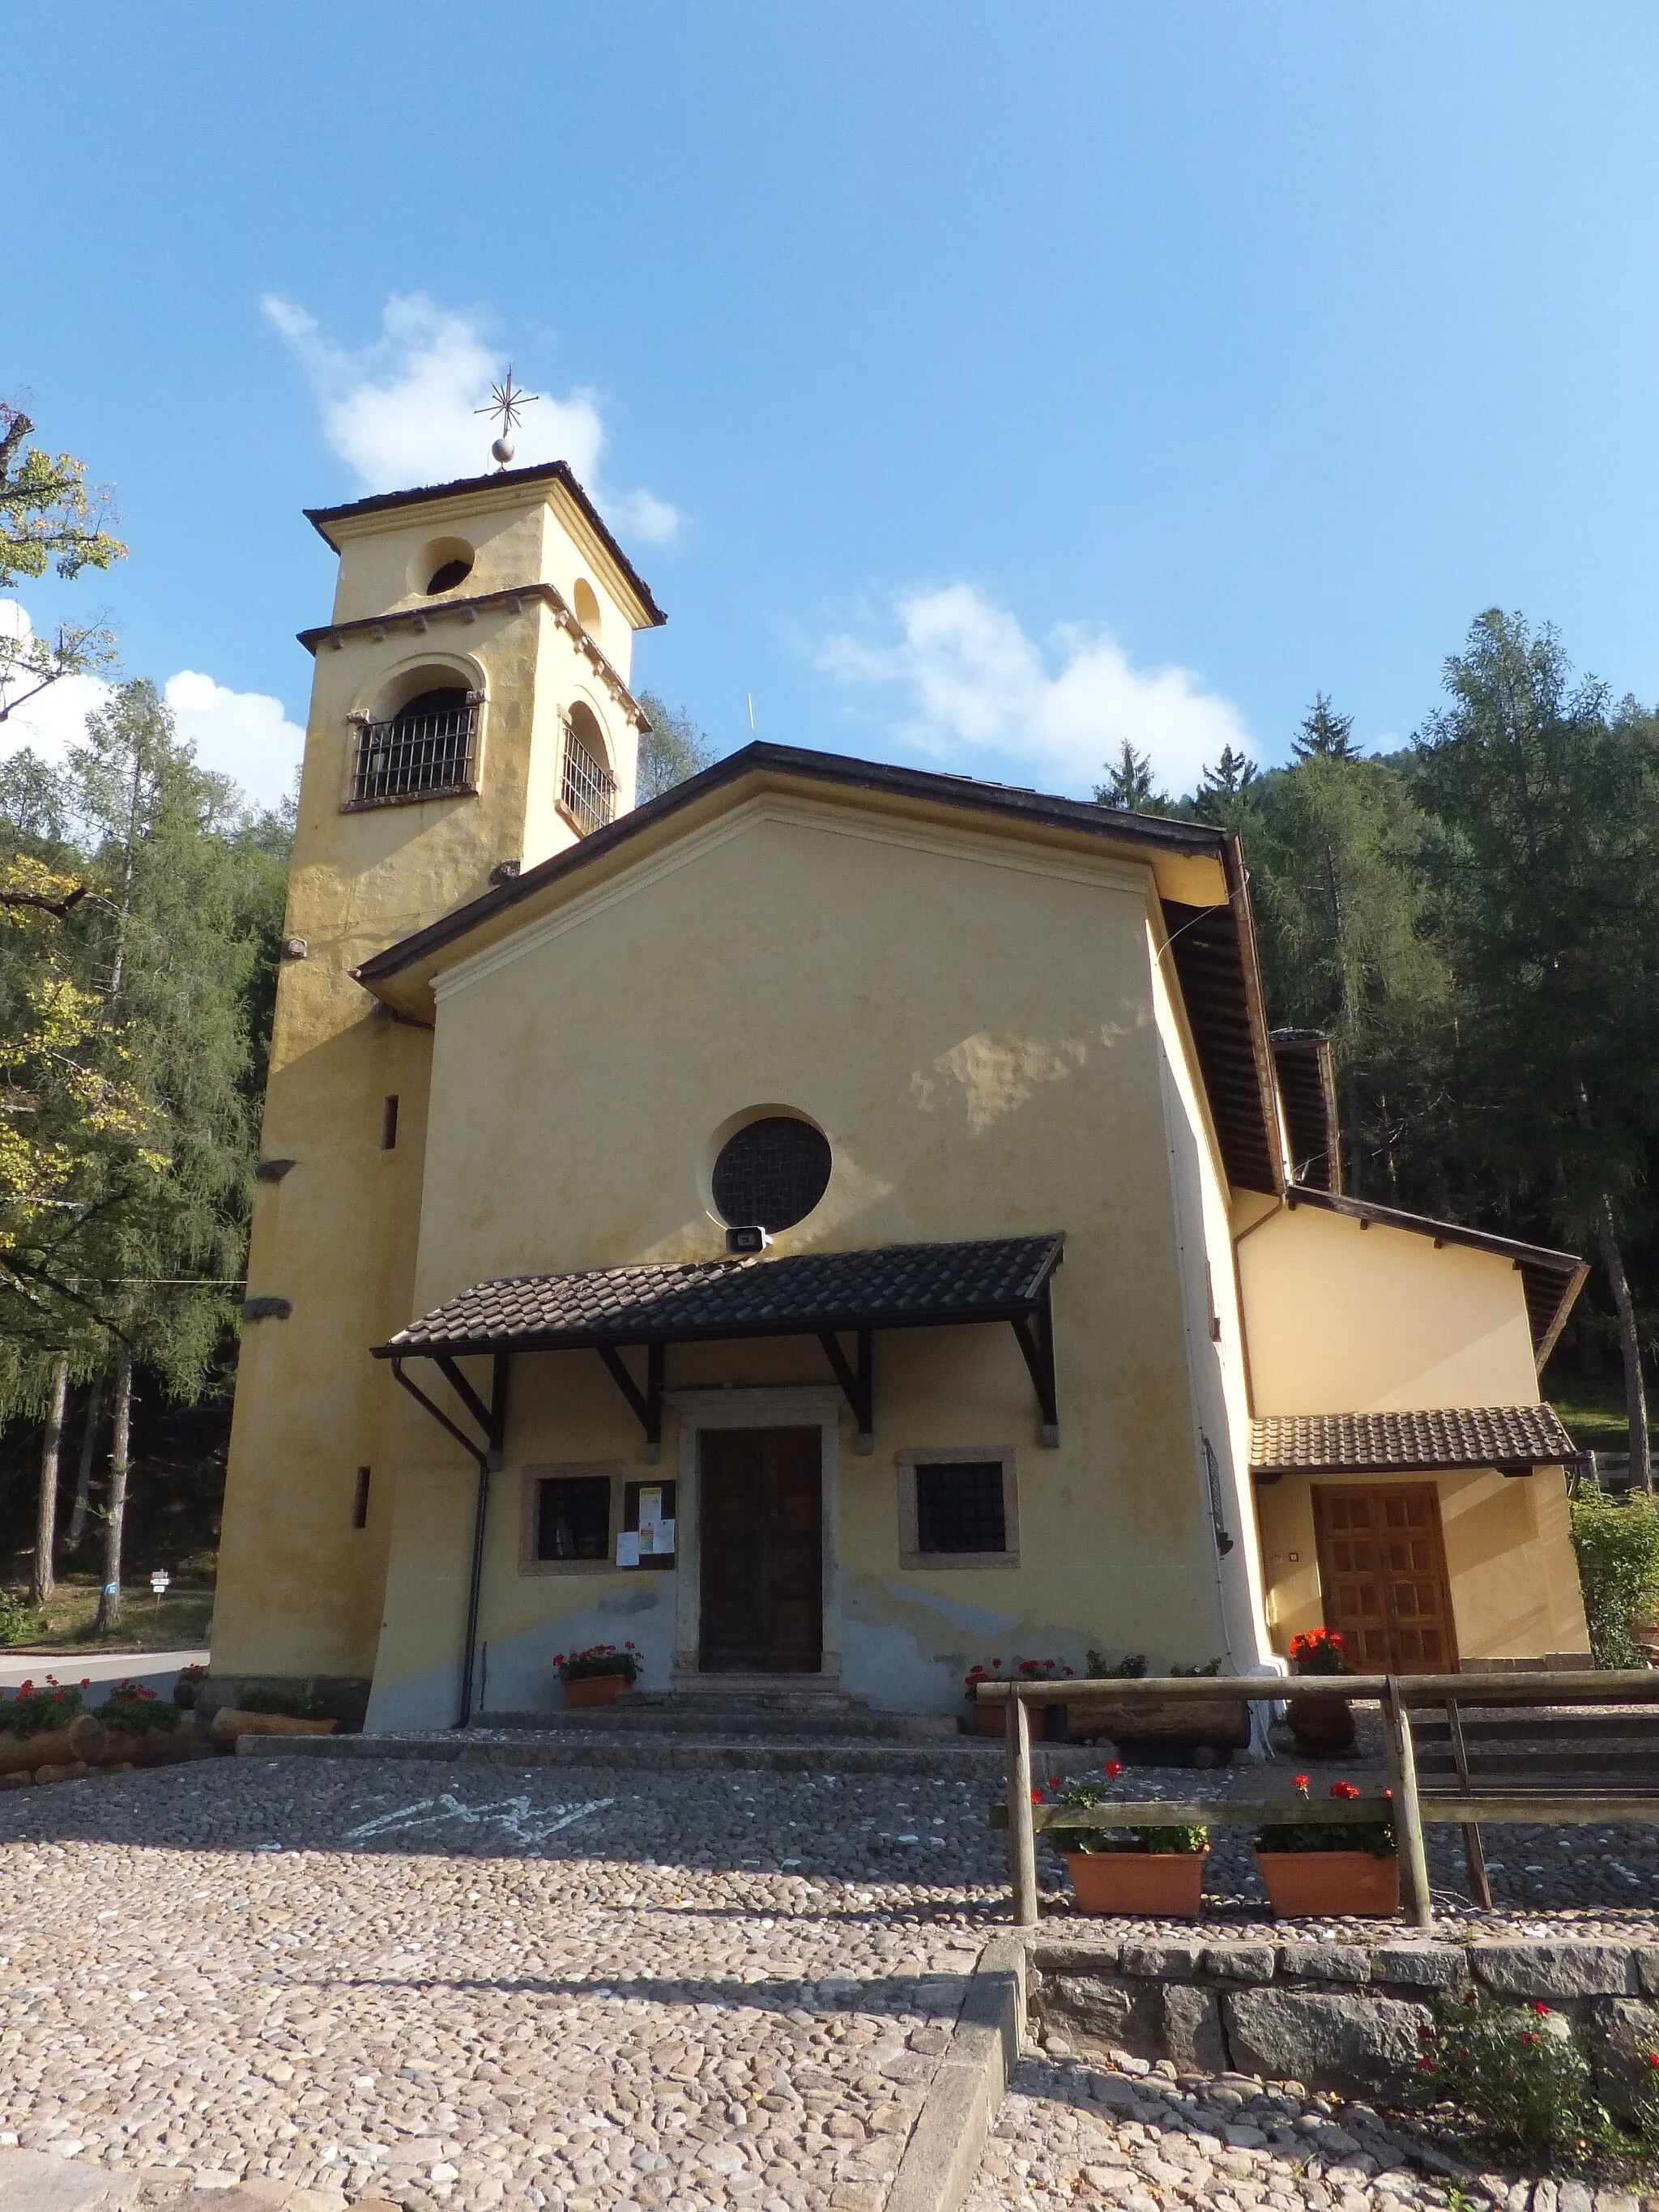 Photo showing: Segonzano (Trentino, Italy) - Sanctuary of the Madonna of Aid